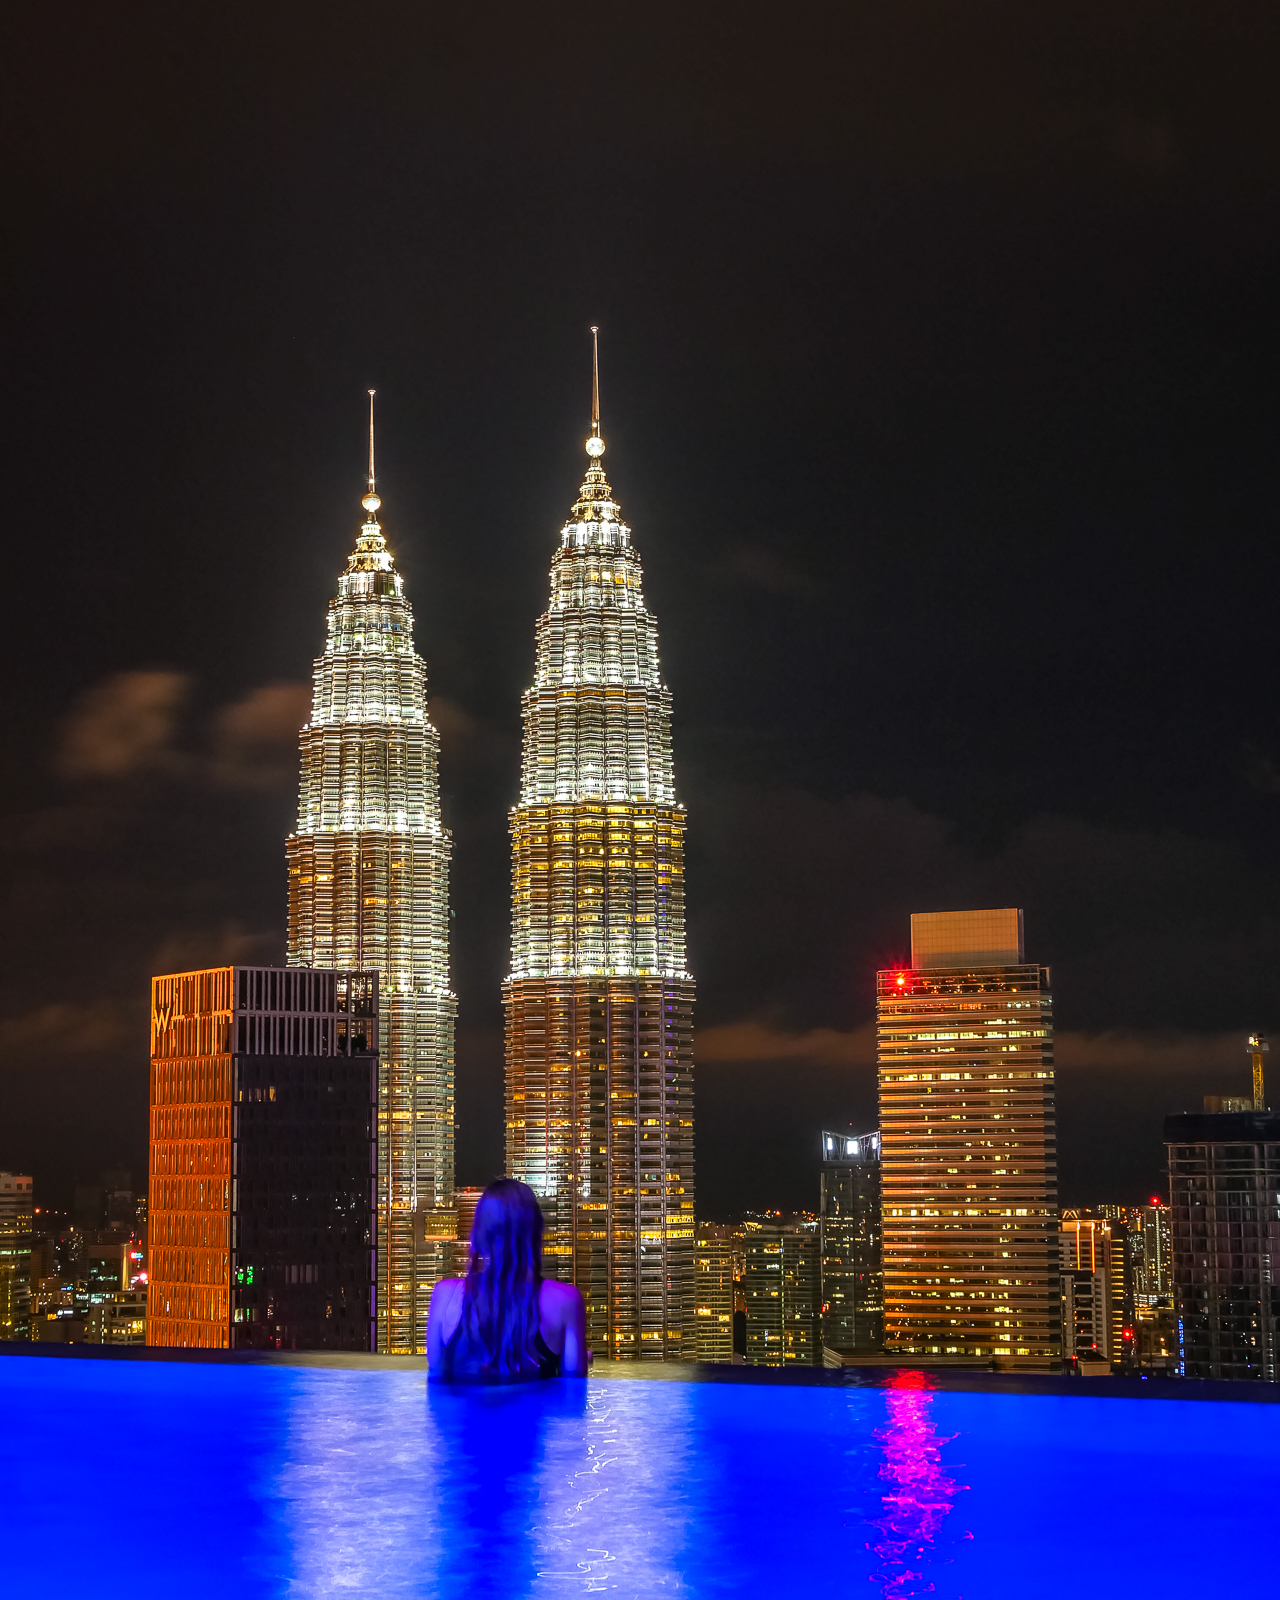 View of the Petronas Towers from The Face Suites rooftop pool